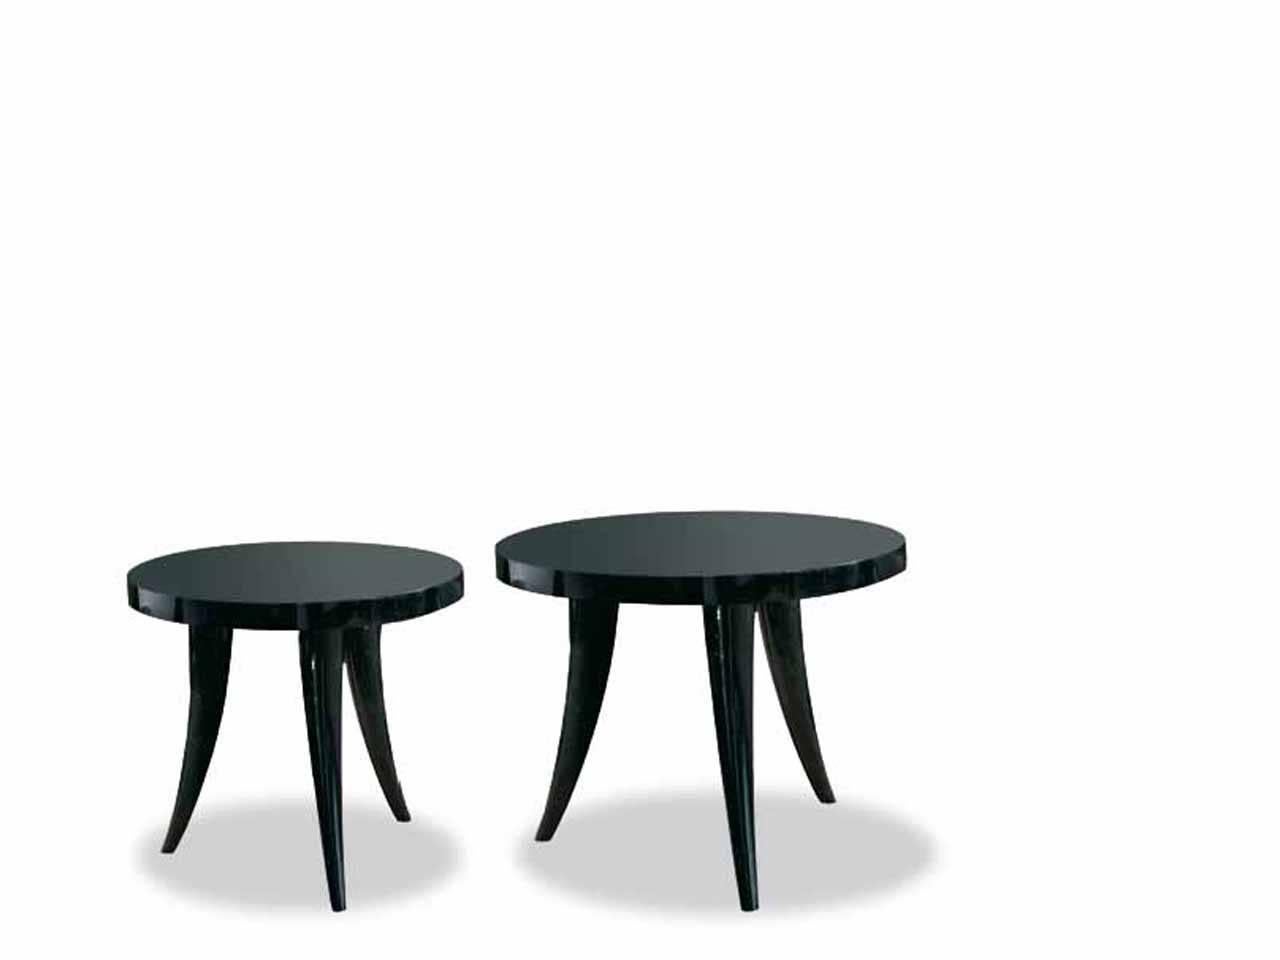 Round small table, mat or gloss black or white lacquered, available 45 or 56 cm high, with three legs.

Round tables available: Top 5 cm thick. 
Available in either:
ø cm.56 x 45 H or:
ø cm.56 x 56 H.

Ask for a quote for any size or finish.
 